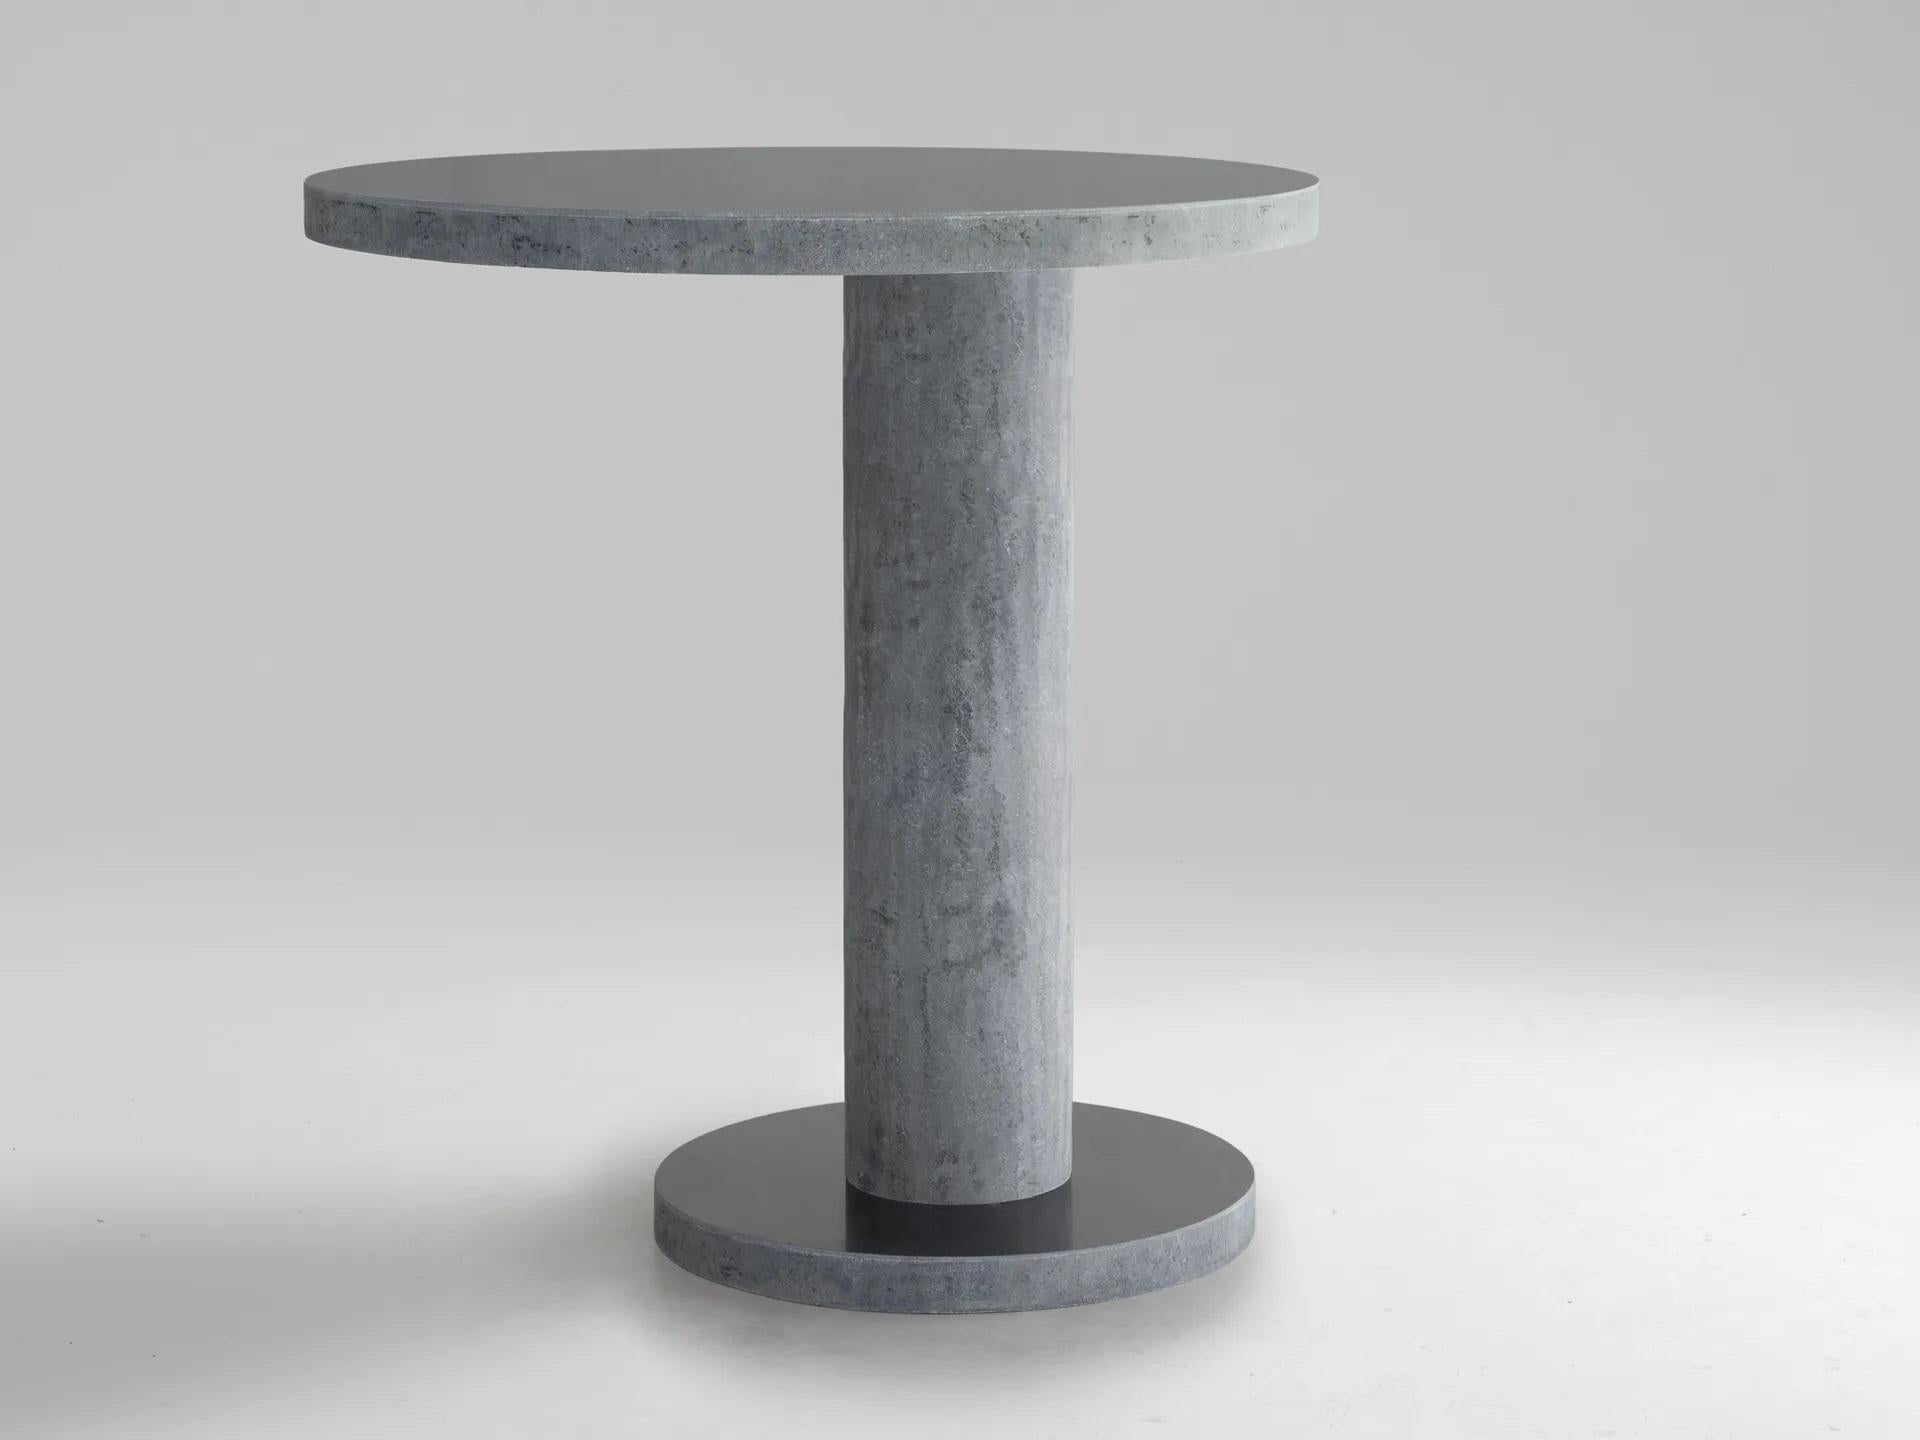 Du.o table by Imperfettolab
2021
Designer: Verter Turroni
Dimensions: Ø 90 x H 90 cm
Materials: Fiberglass
Available in black - raw Material and white- raw Material.

Two discs that approach and move away, following the Size of the cylinder